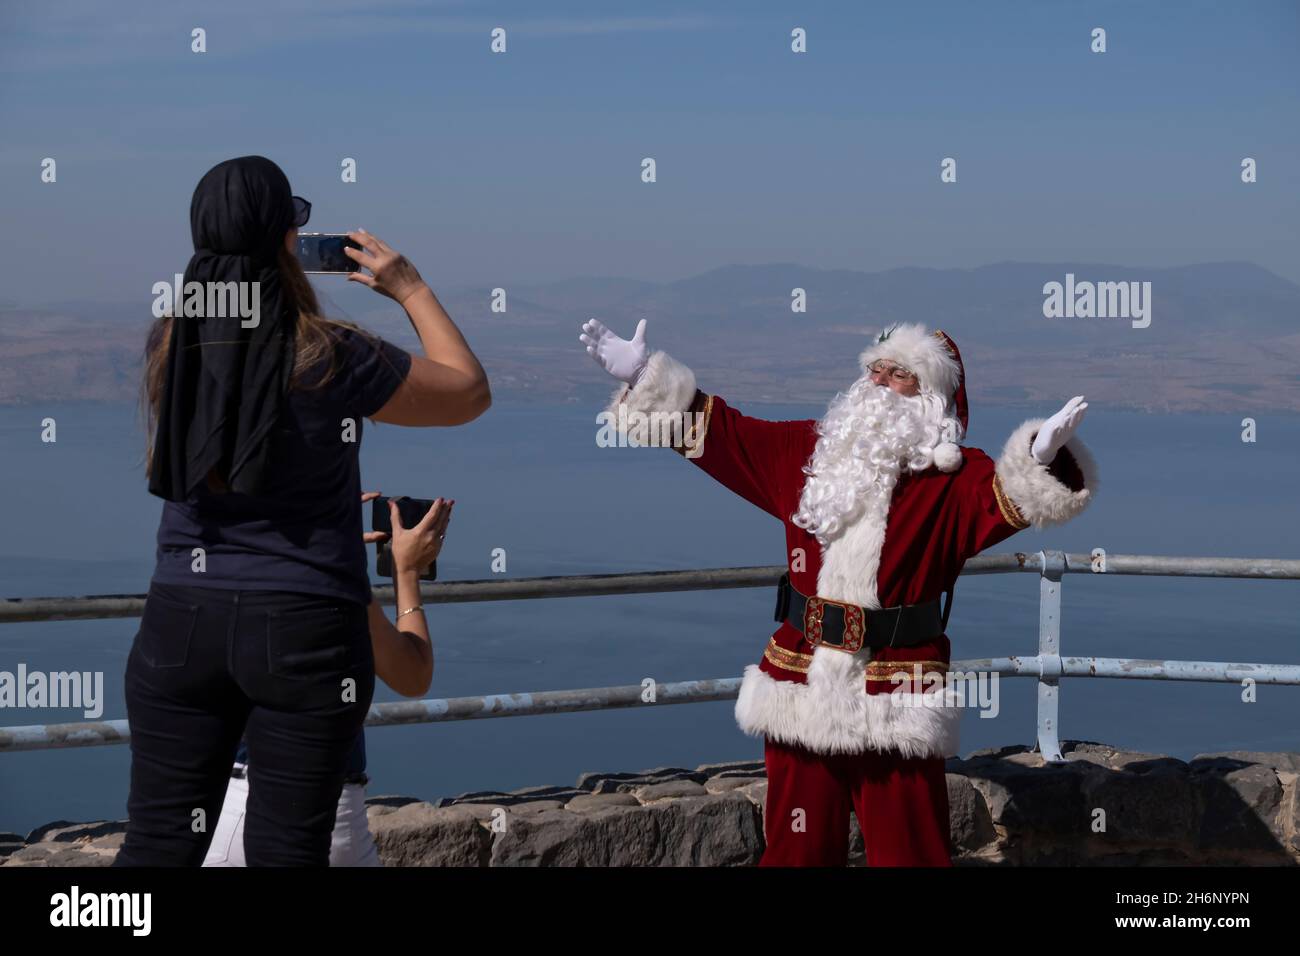 Israeli women taking photo of Issa Kassissieh, an Arab Orthodox Christian and Israel’s only certified Santa Claus, at Mitzpe Shalom, also known as Peace Lookout located at the eastern side of the Sea of Galilee in Israel. Stock Photo